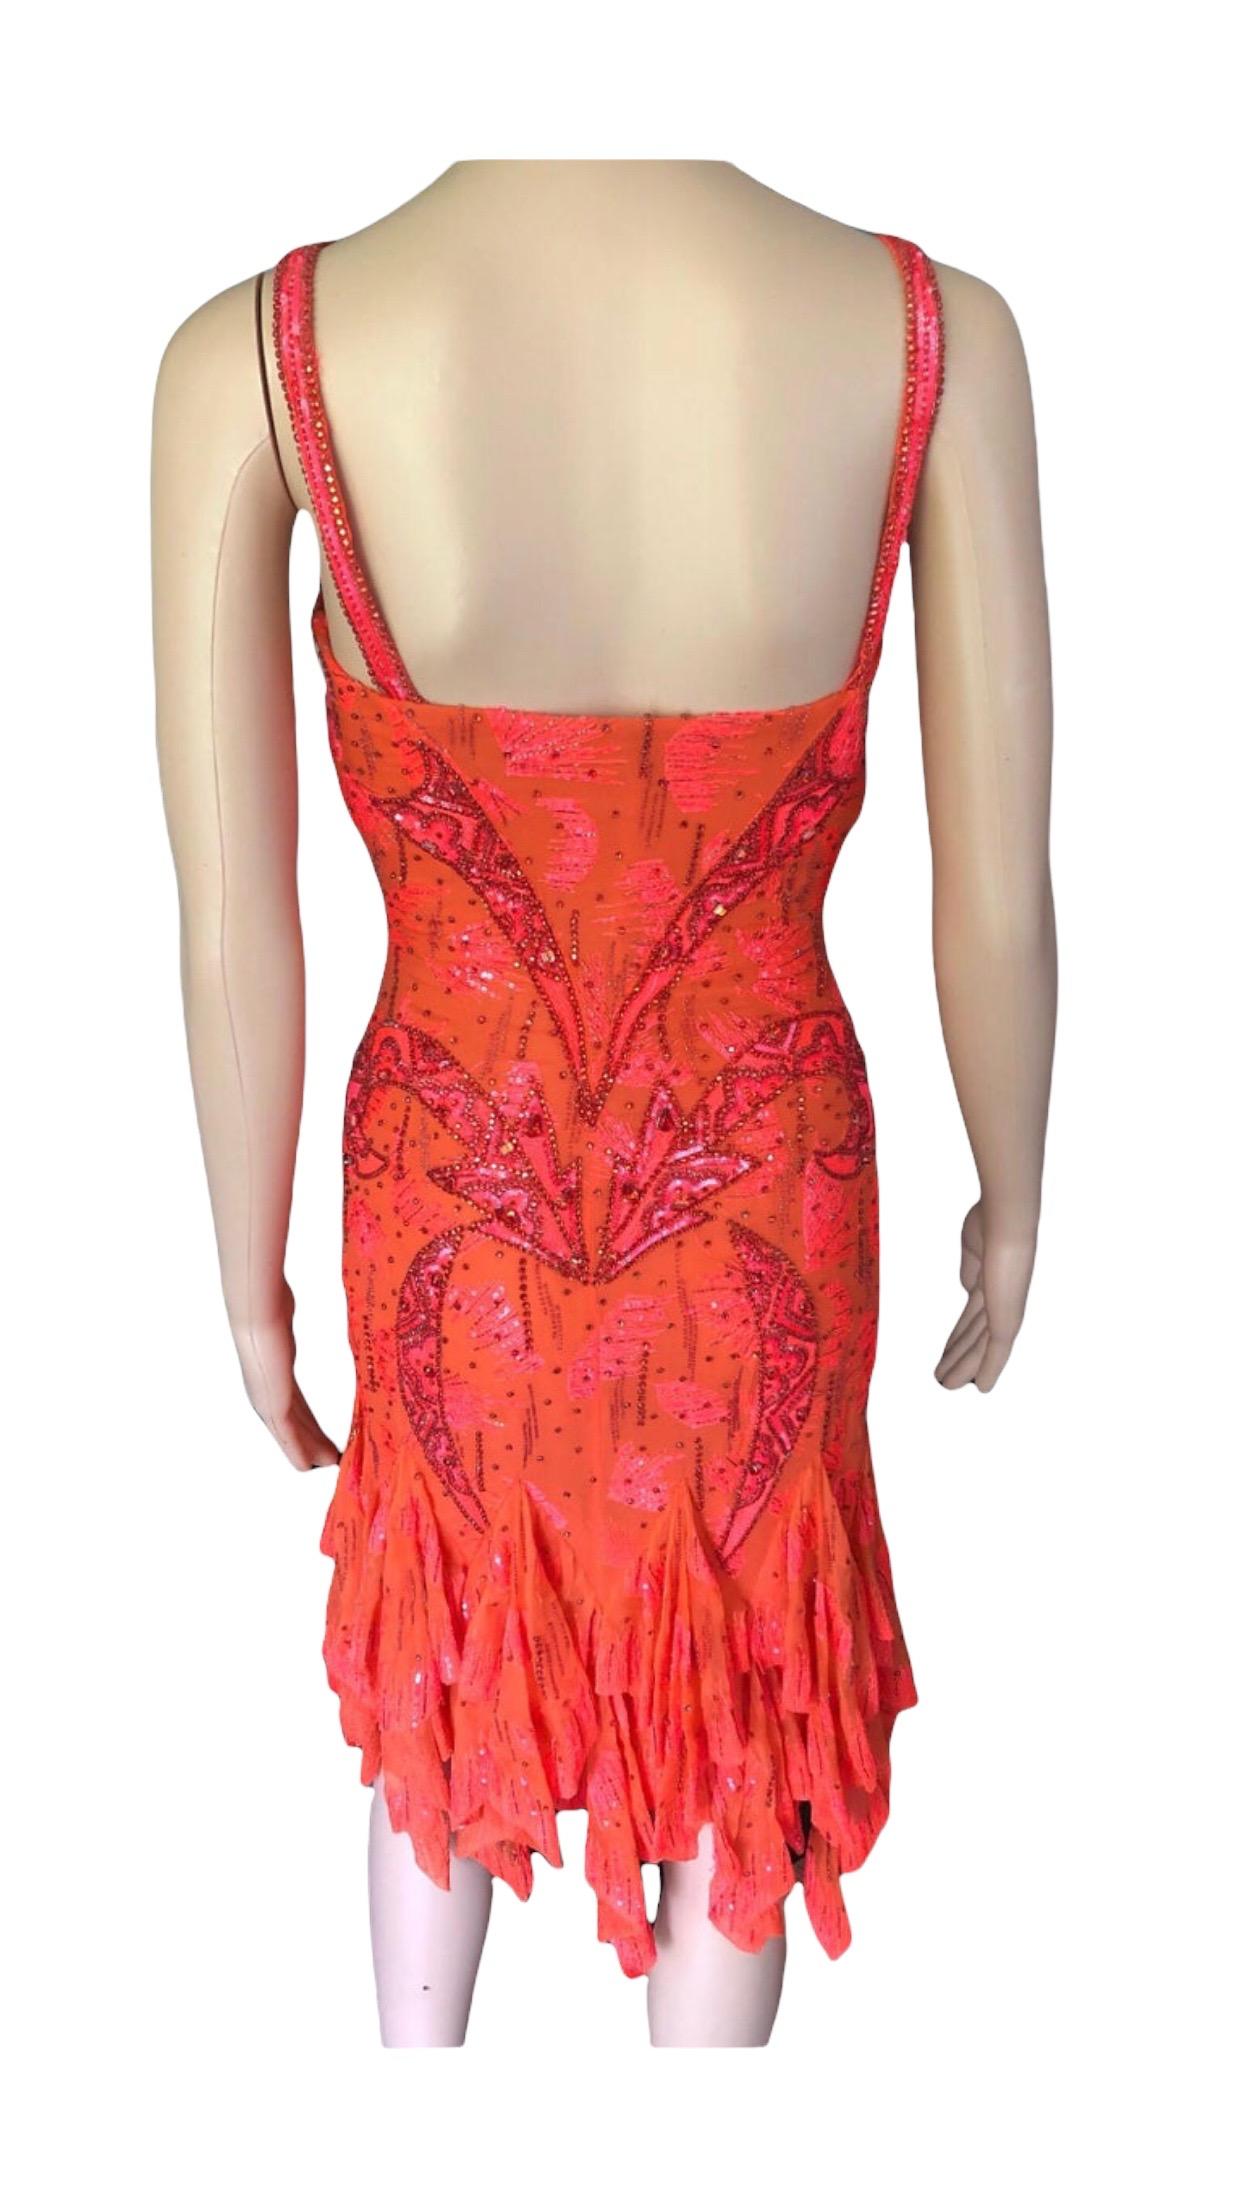 Atelier Versace by Gianni Versace S/S 2002 Haute Couture Embellished Dress For Sale 8